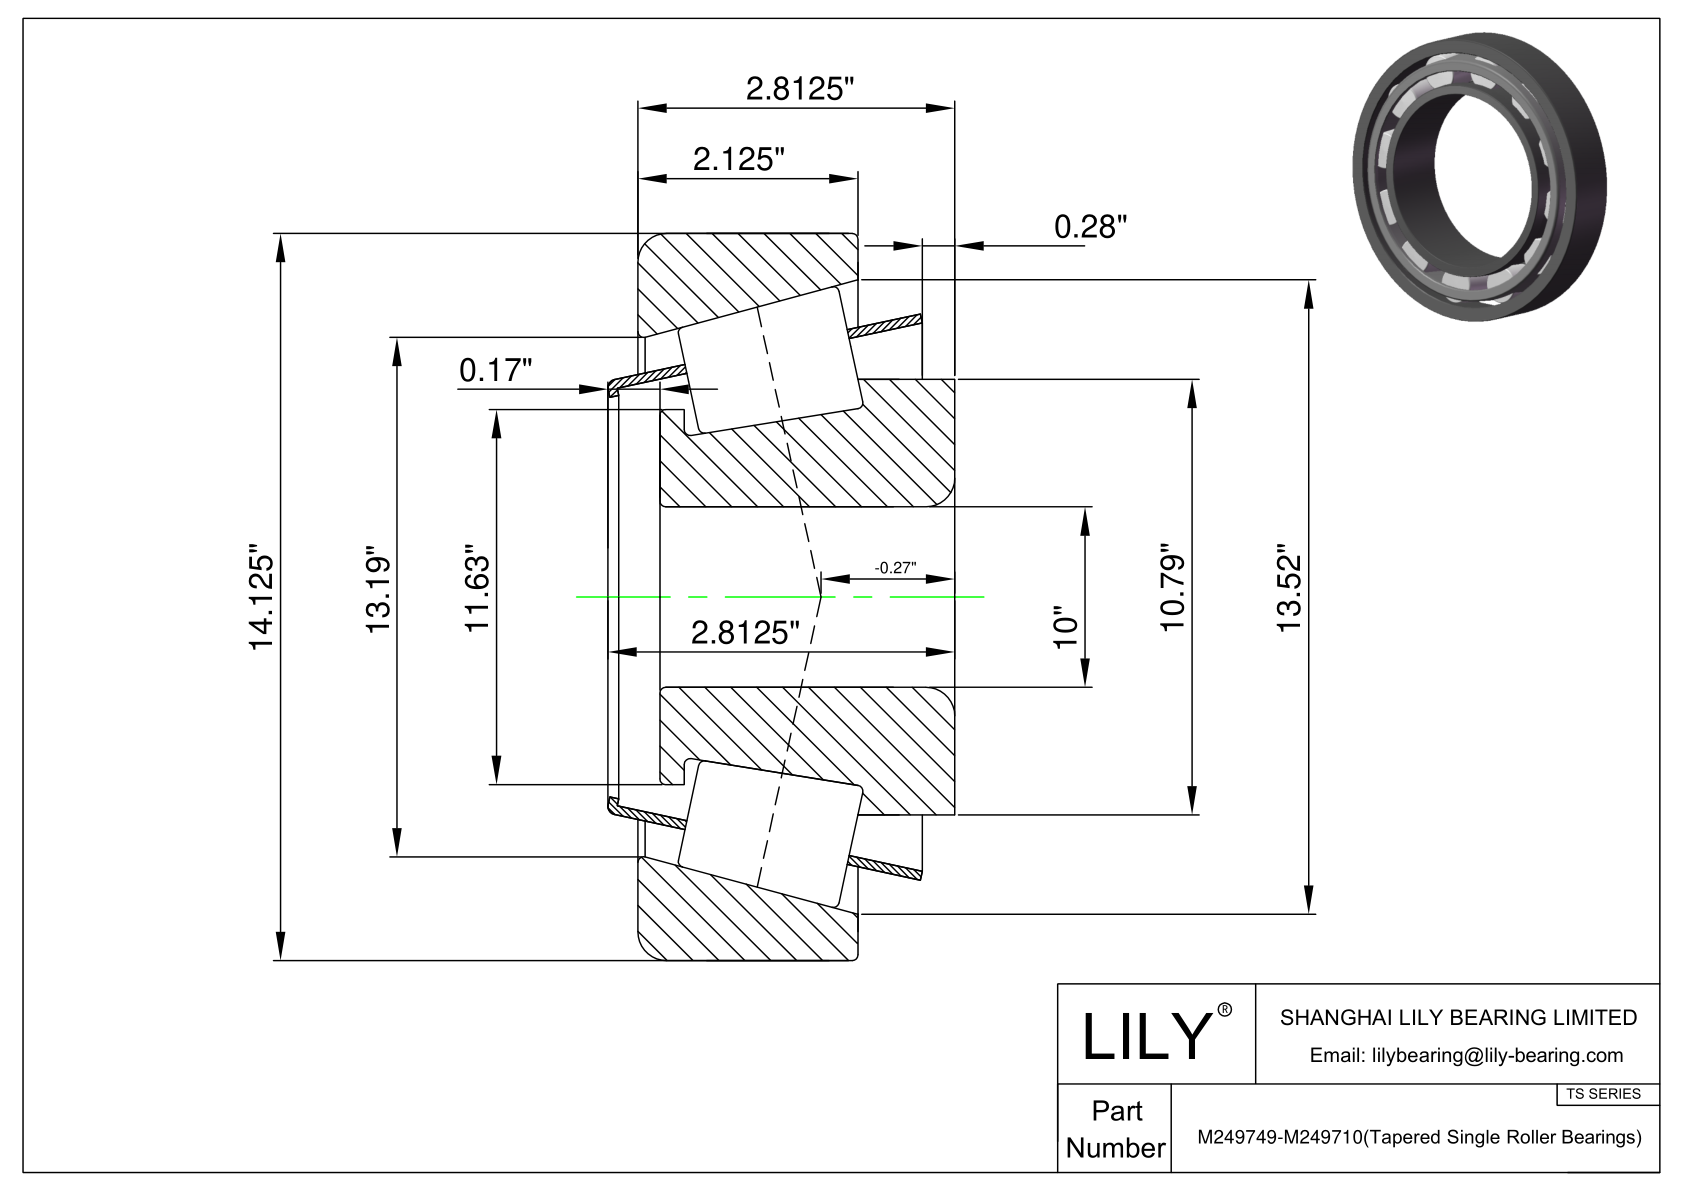 M249749-M249710 TS (Tapered Single Roller Bearings) (Imperial) cad drawing